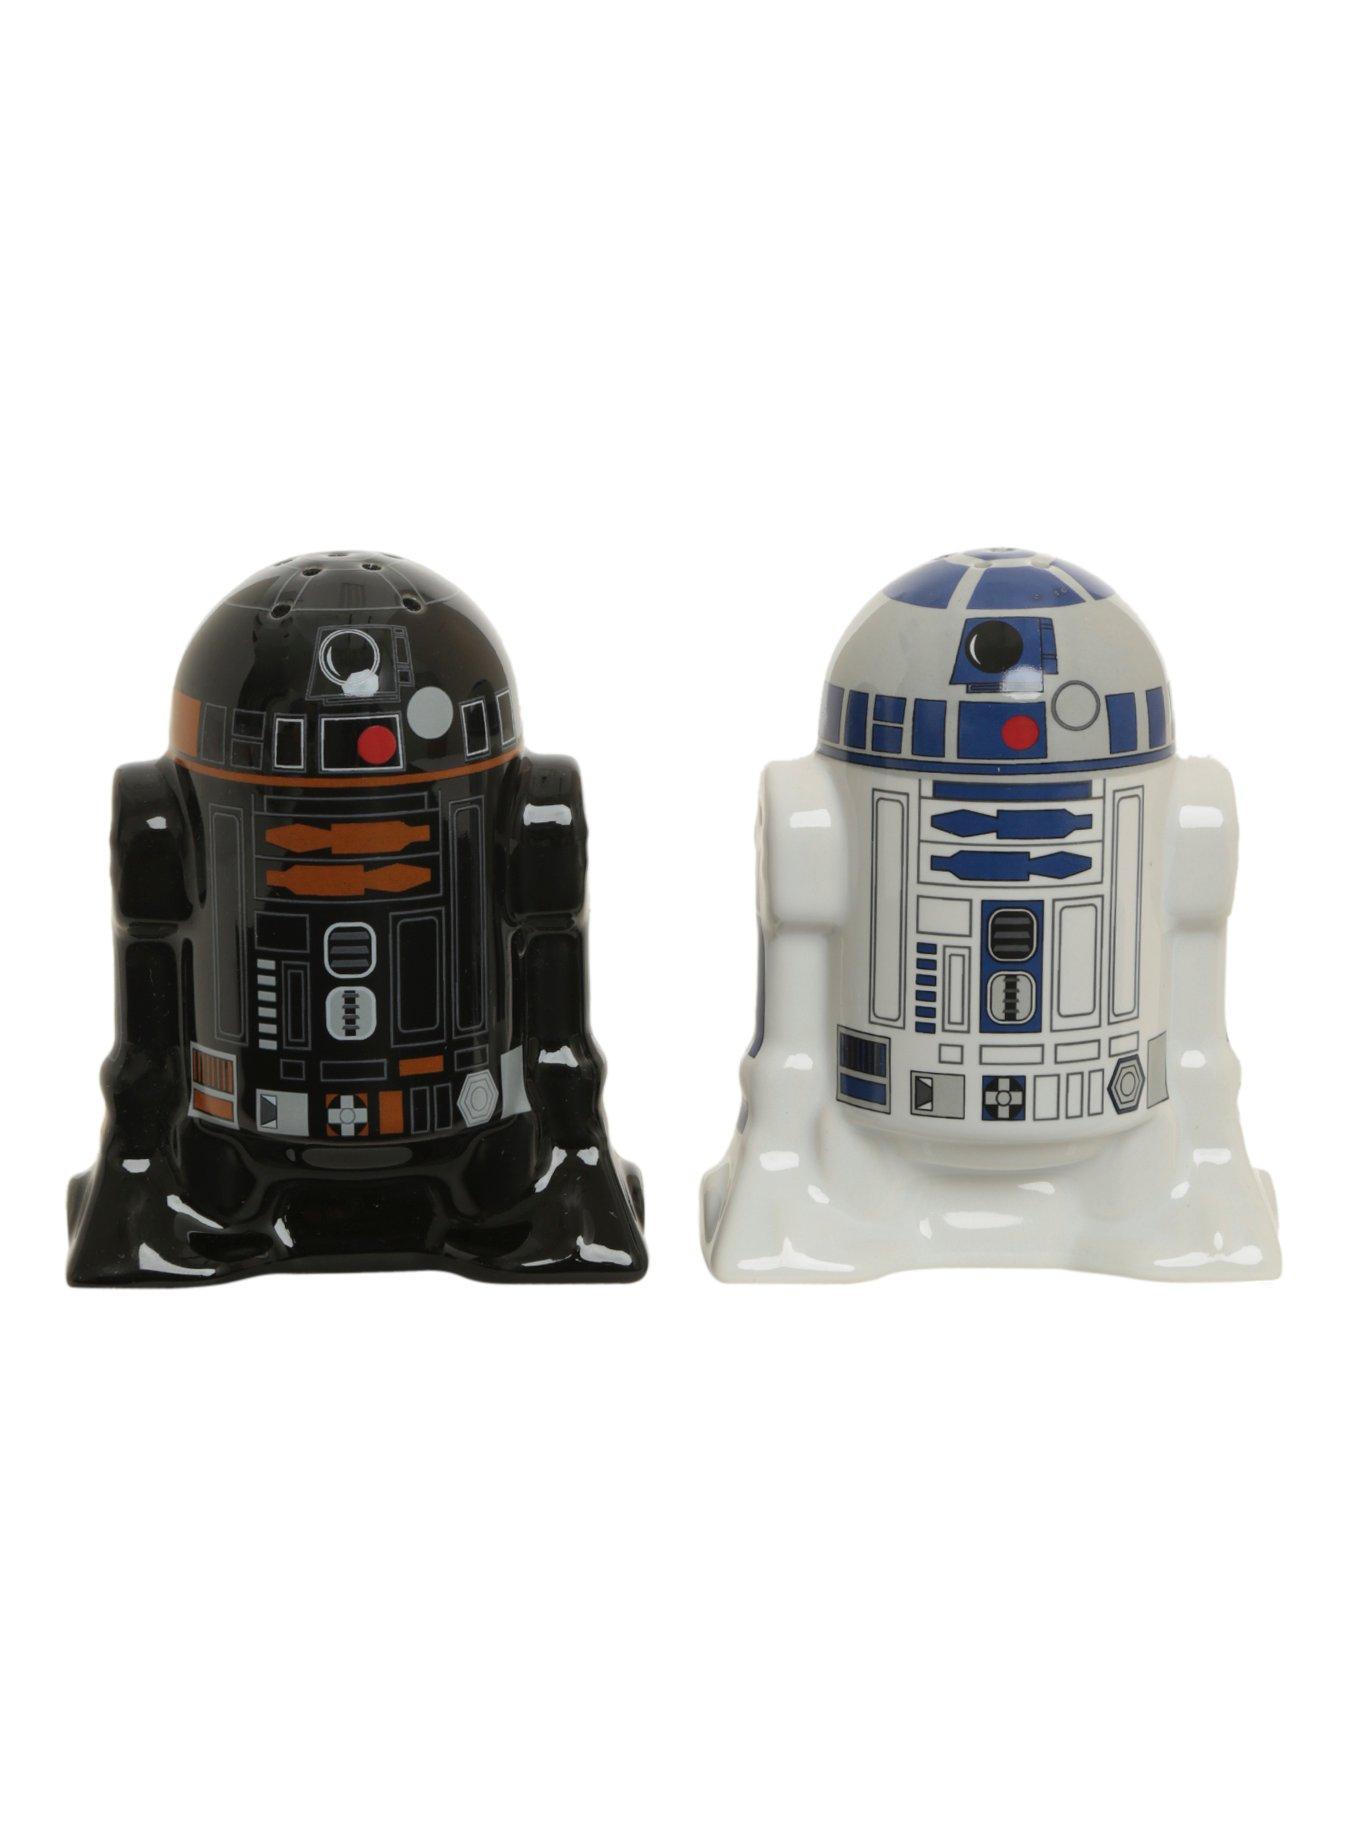 Star Wars Salt and Pepper Shakers R2D2 and R2Q5 R2-D2 and R2-Q5 New with  Box 